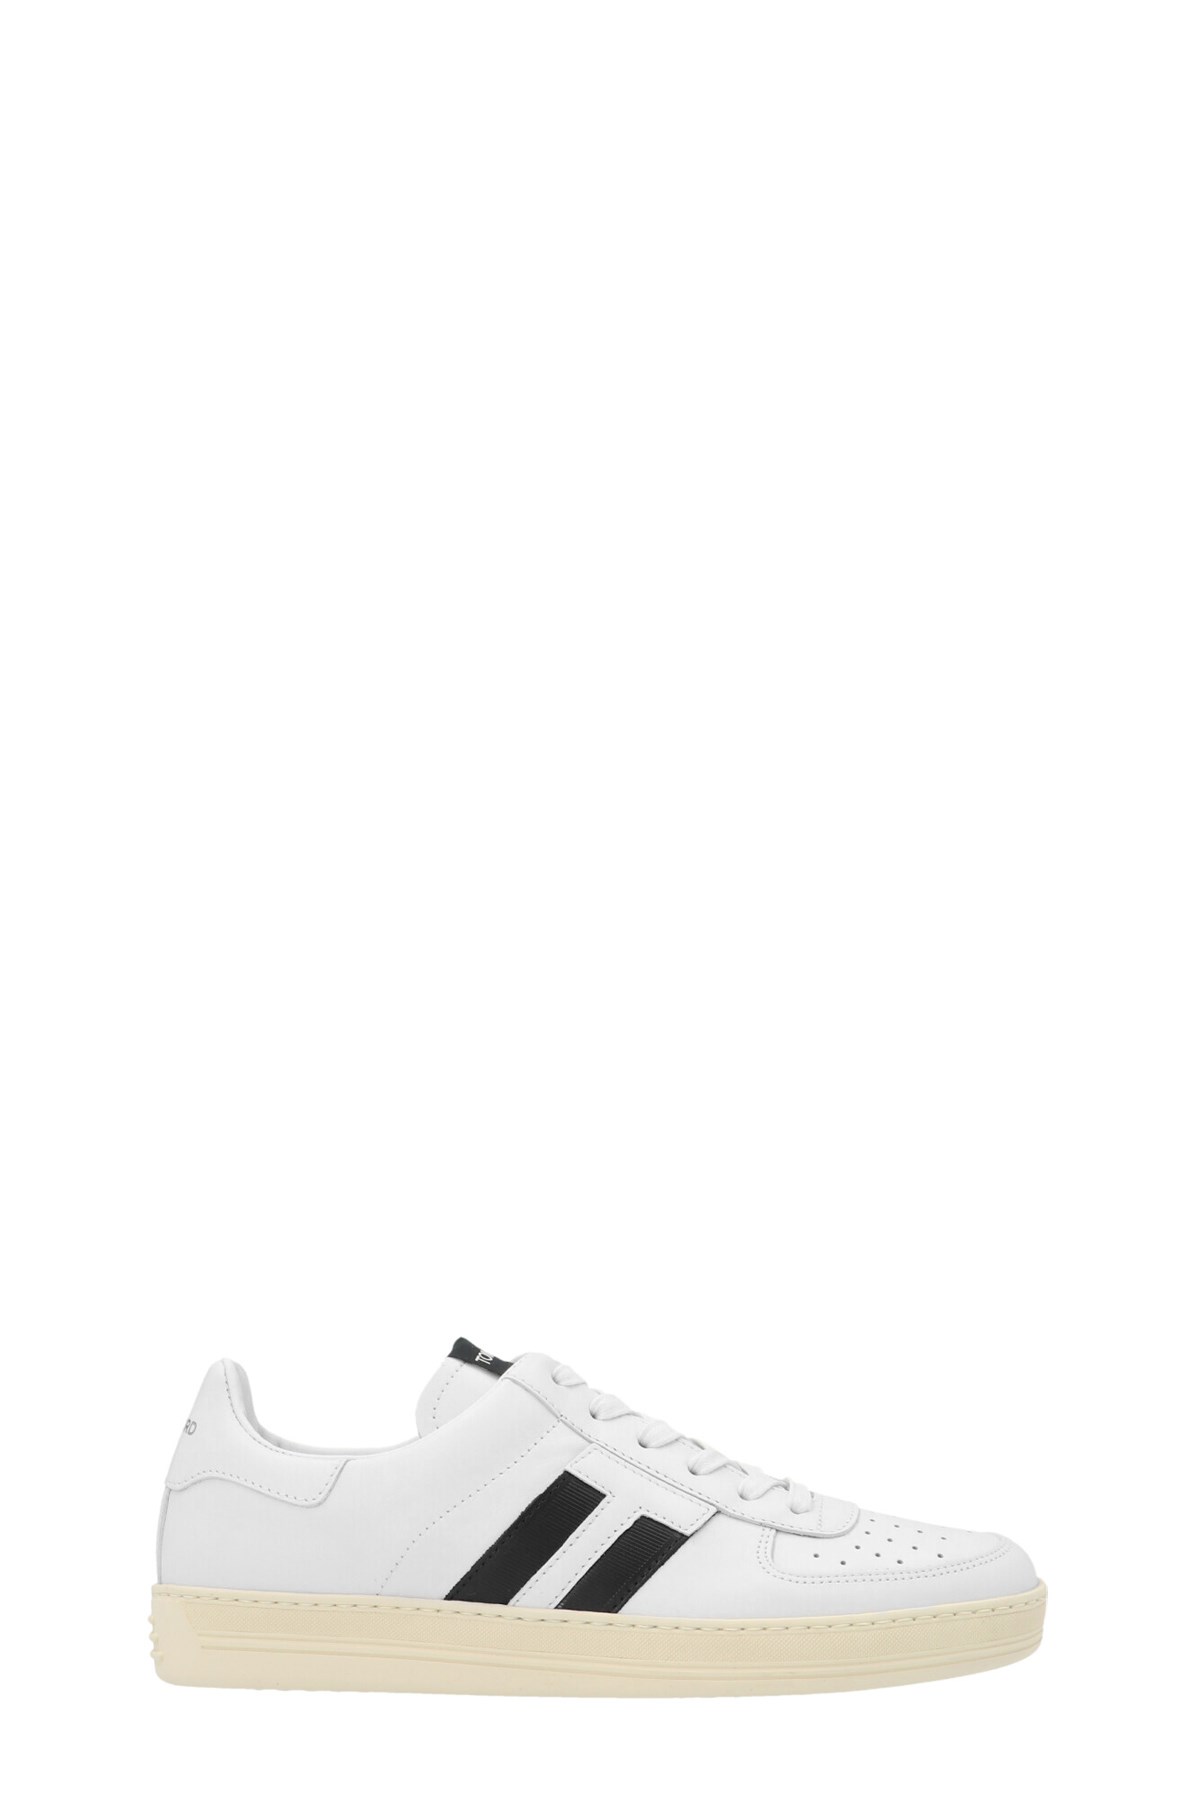 TOM FORD Sneakers With Contrast Bands